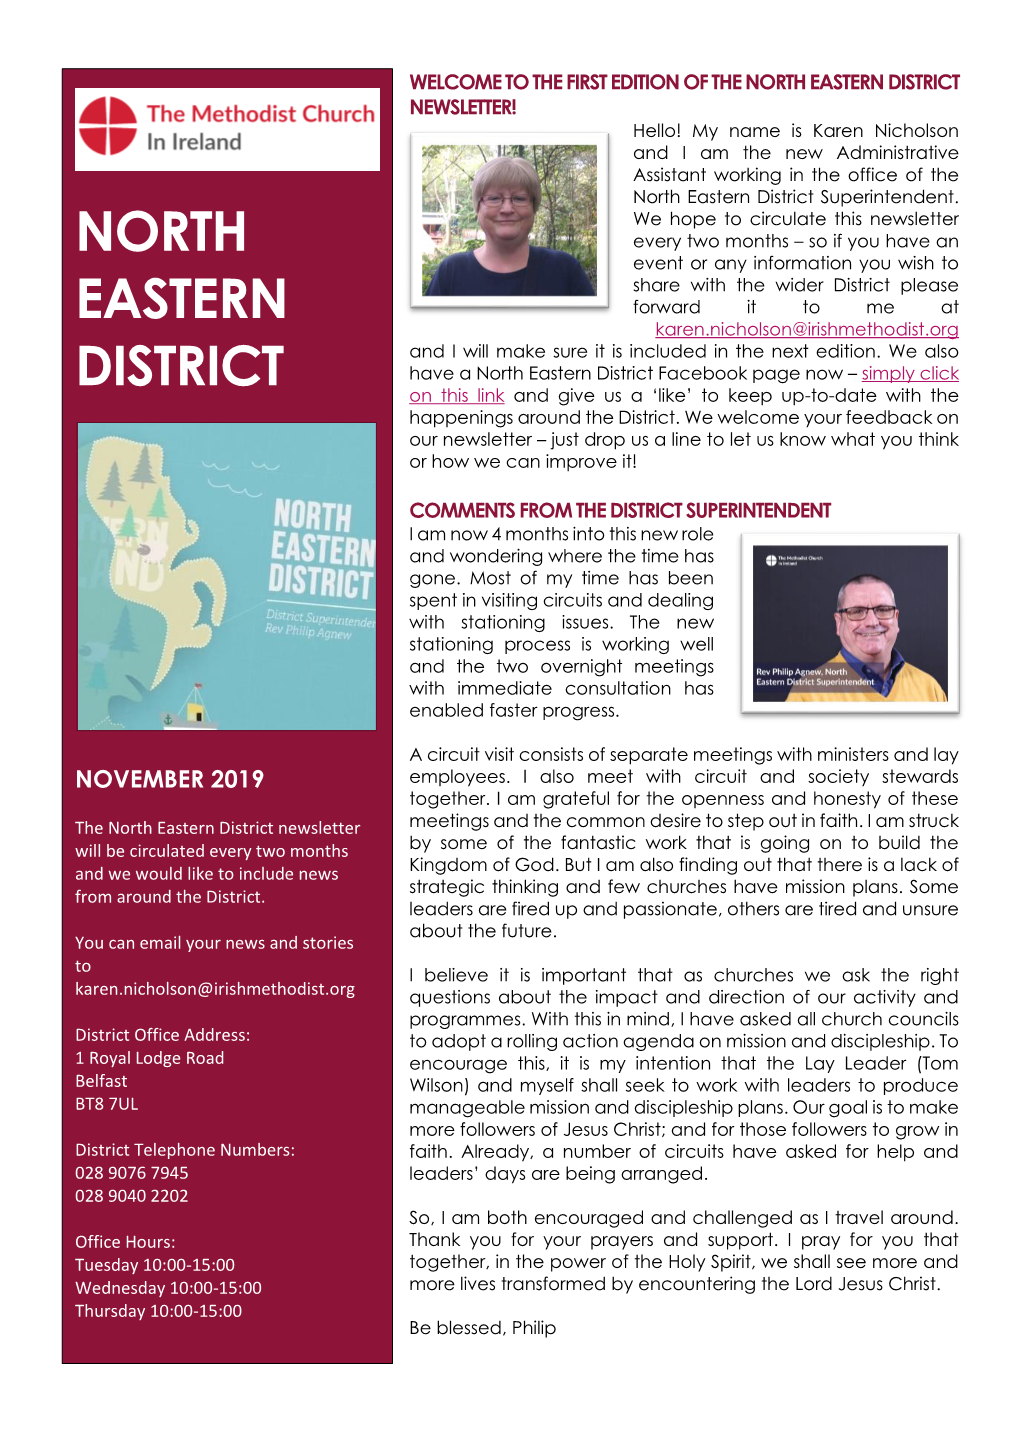 NORTH EASTERN DISTRICT NEWSLETTER! Hello! My Name Is Karen Nicholson and I Am the New Administrative Assistant Working in the Office of The